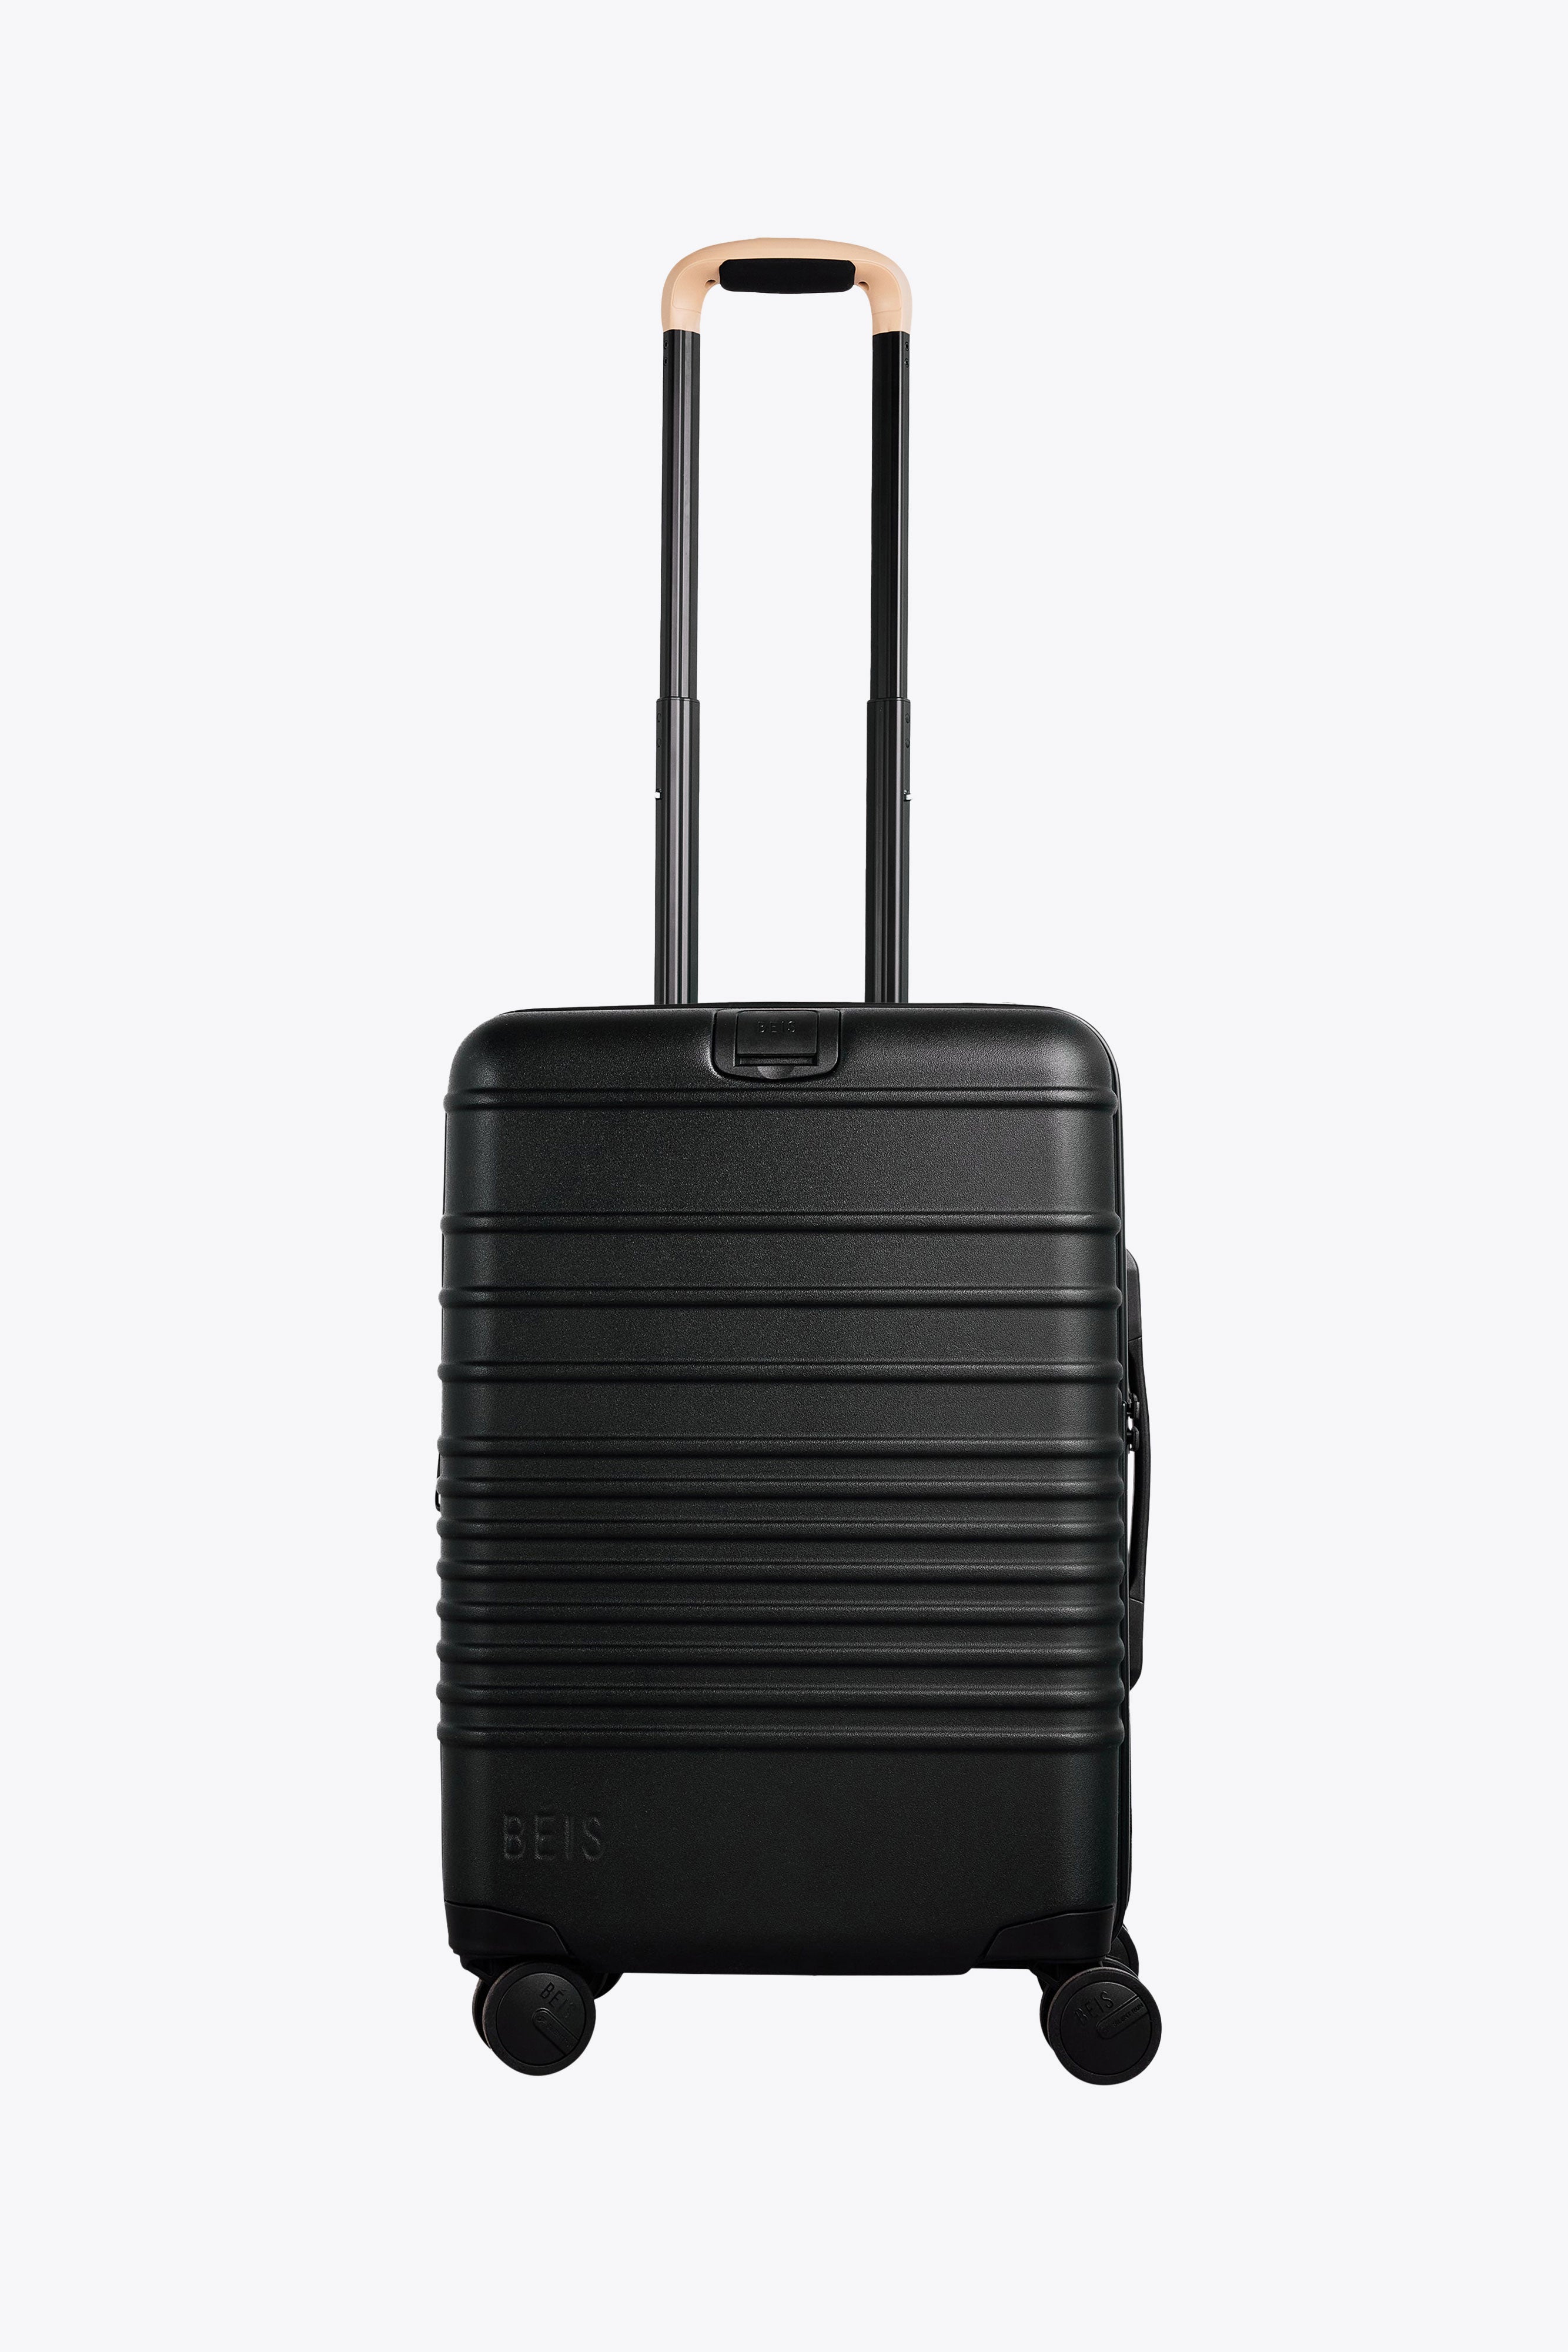 Beis 21-Inch Rolling Spinner Suitcase in Navy